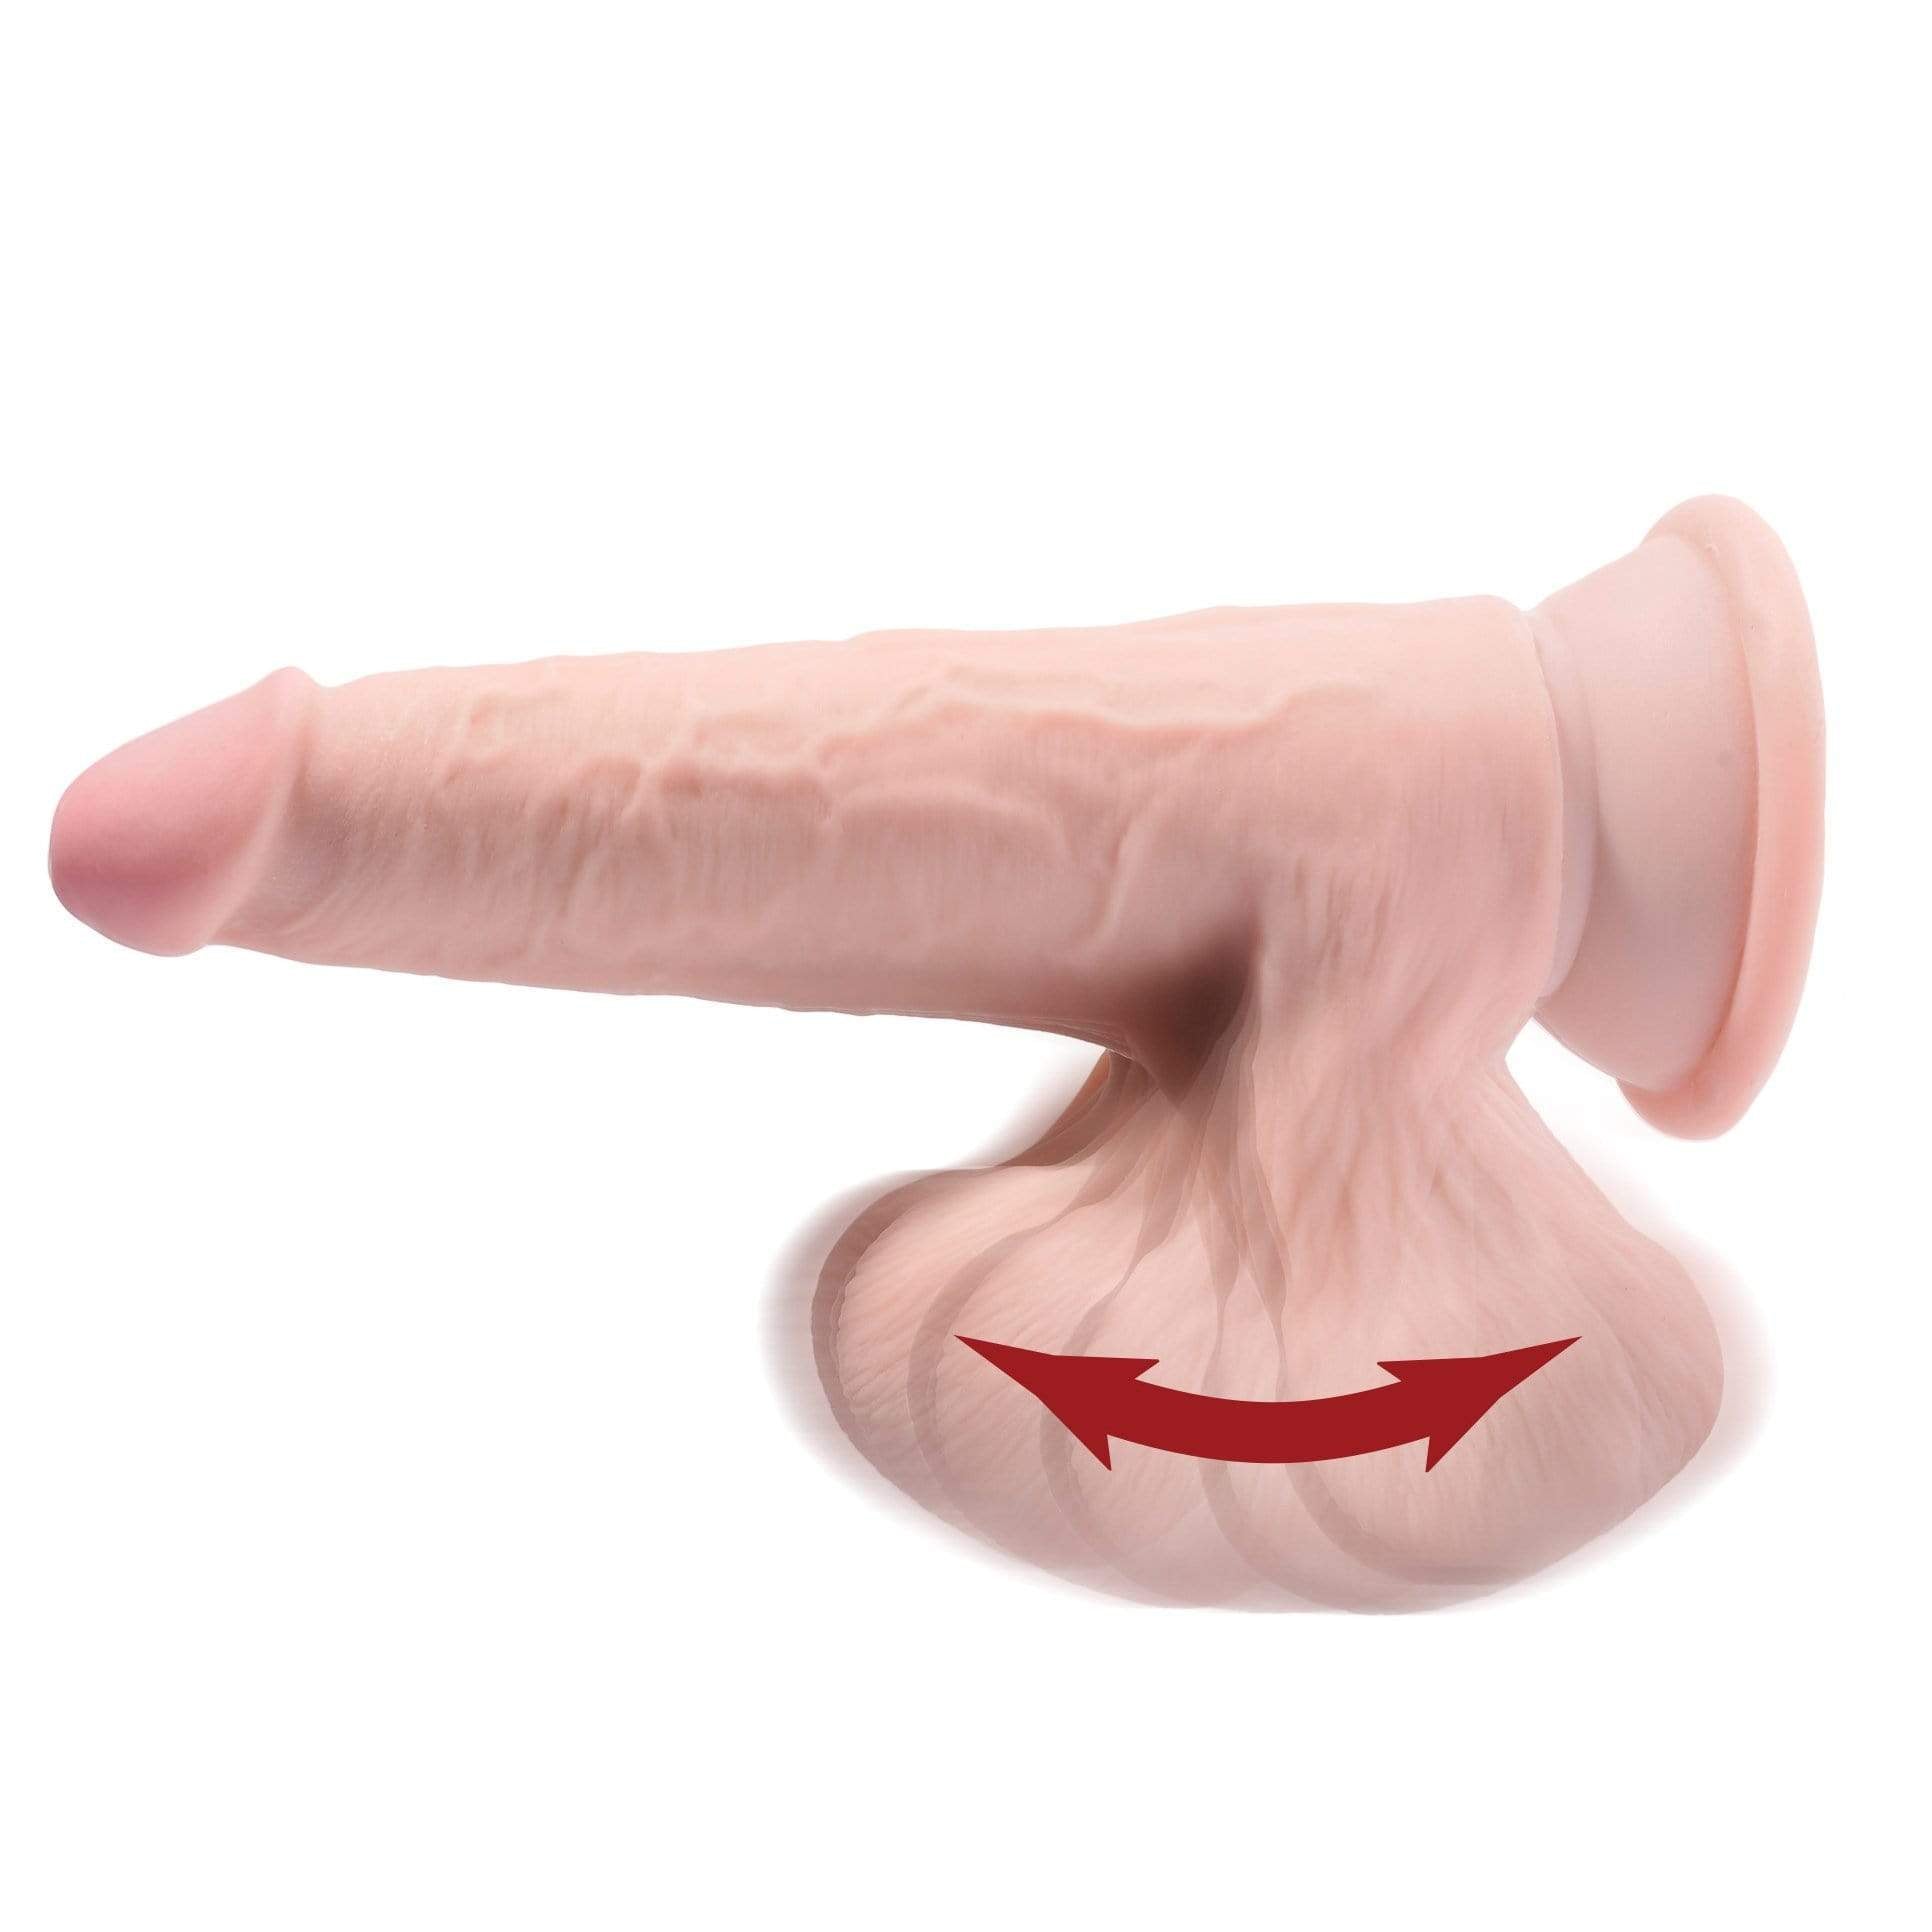 Pipedream - King Cock Plus Triple Density Cock With Swinging Balls 6" (Beige) -  Realistic Dildo w/o suction cup (Vibration) Rechargeable  Durio.sg